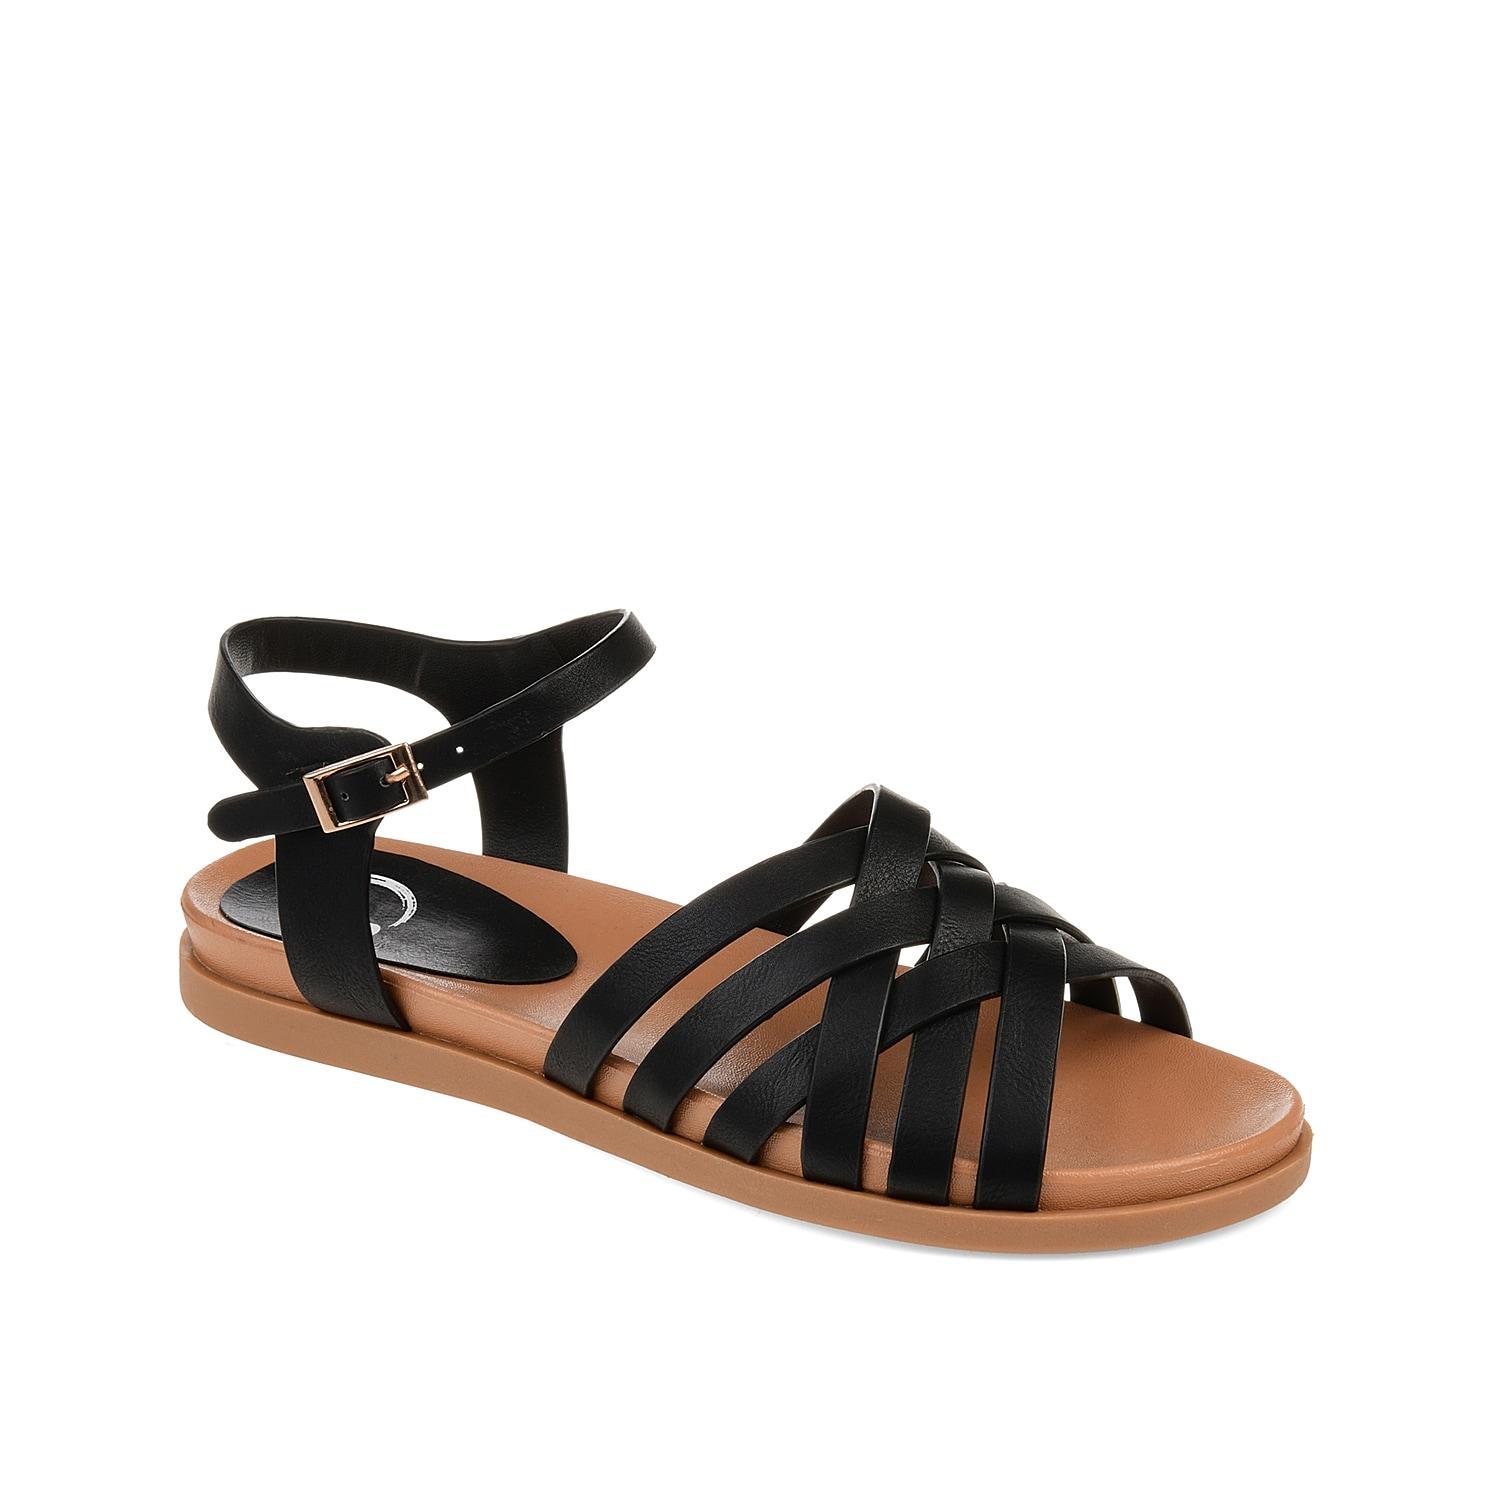 Journee Collection Kimmie Womens Sandals Grey Product Image